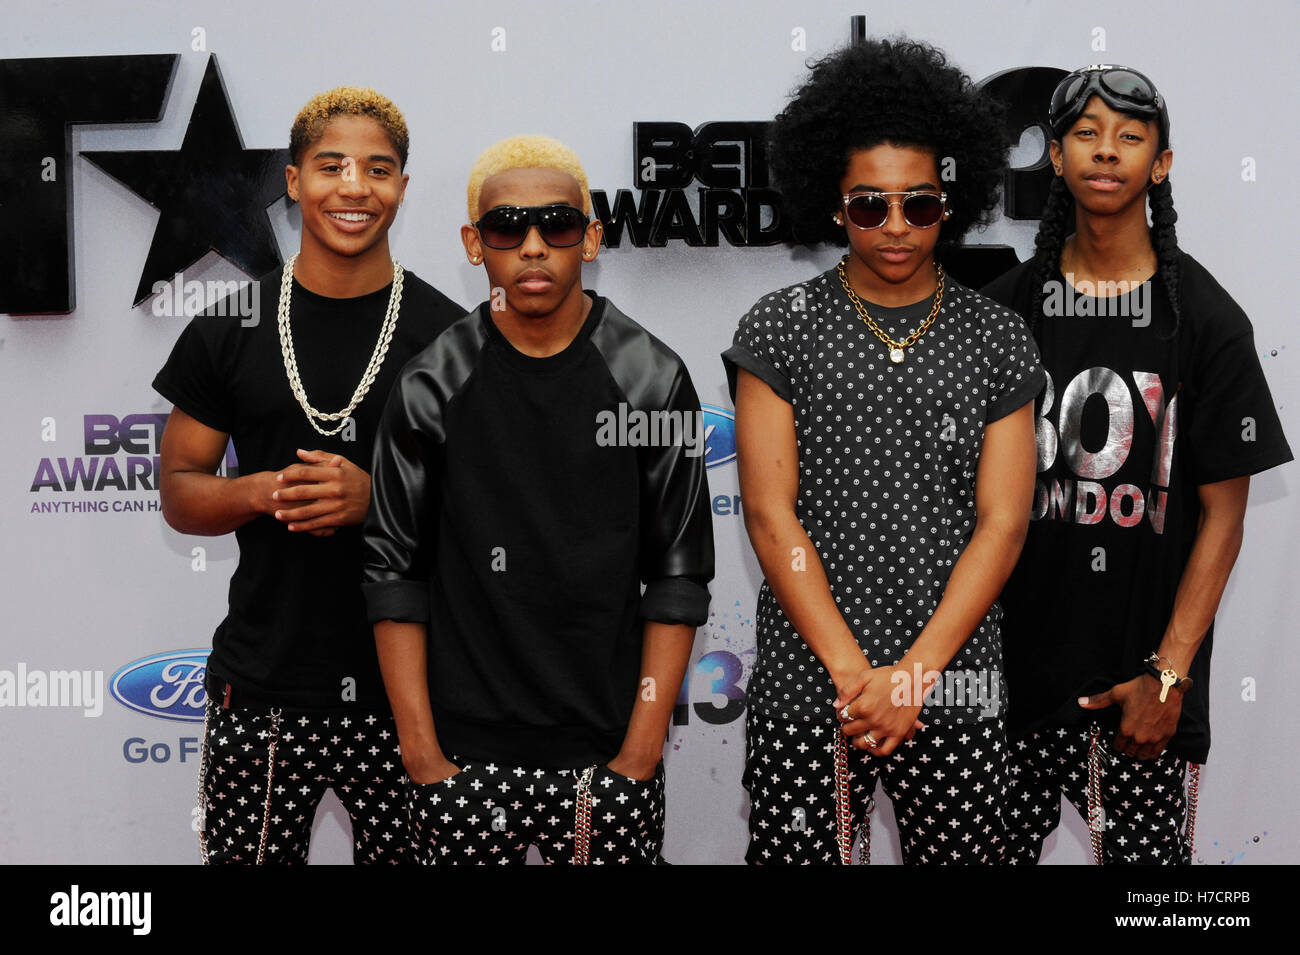 Mindless Behavior (L-R) Roc Royal, Prodigy, Princeton and Ray Ray attend the Ford Red Carpet at the 2013 BET Awards at the Nokia Theatre L.A. Live on June 30, 2013 in Los Angeles, California. Stock Photo